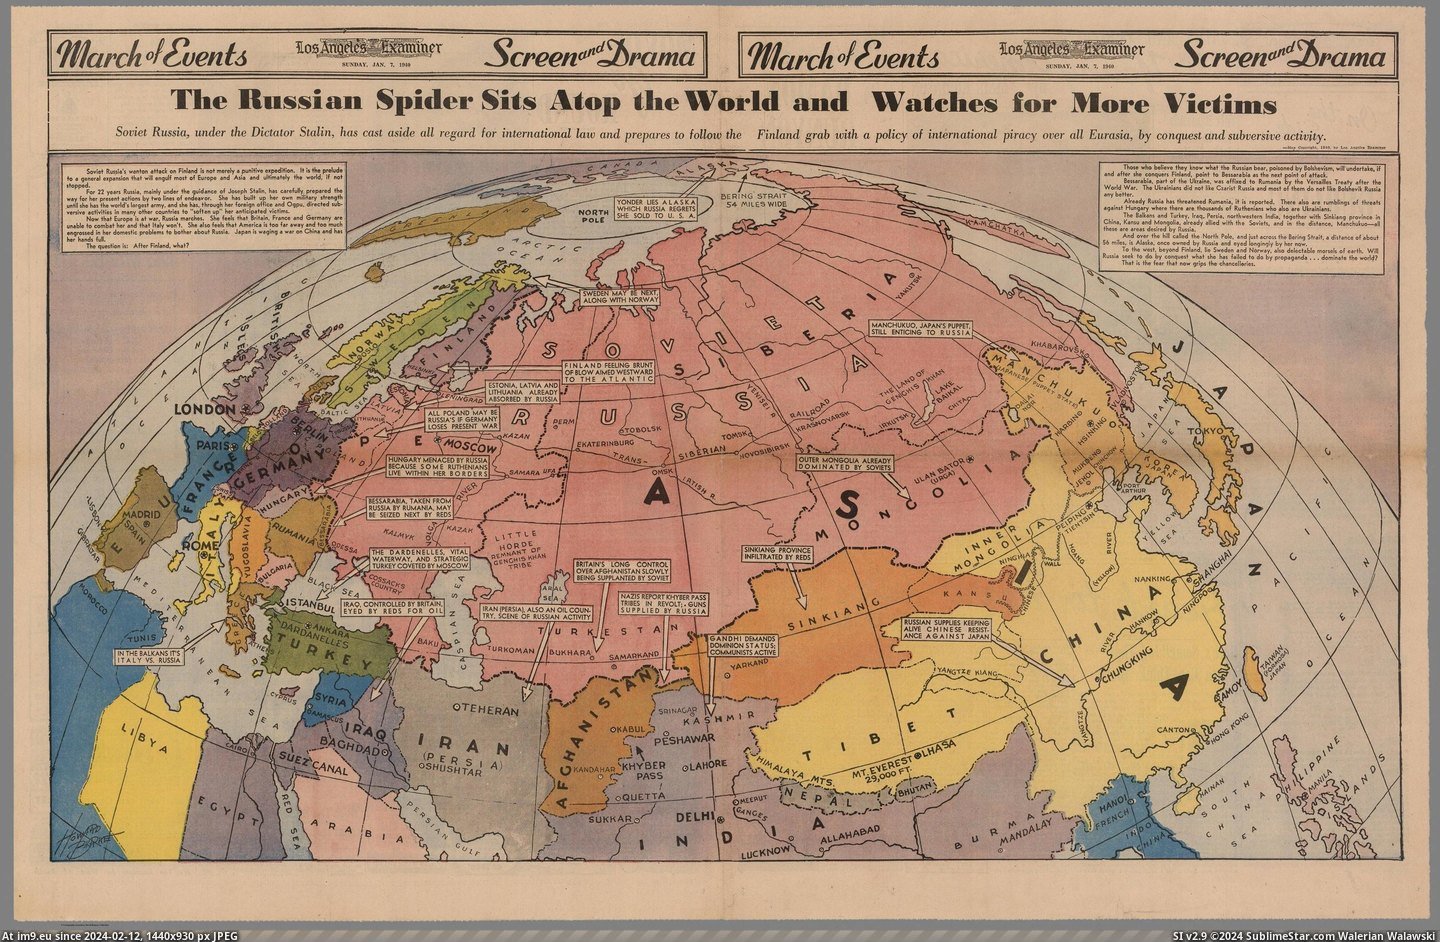 #World #Map #Full #Spread #Russian #Sits #Spider #Colored [Mapporn] The Russian Spider sits atop the World and Watches for More Victims. Colored full spread newspaper map published in th Pic. (Image of album My r/MAPS favs))